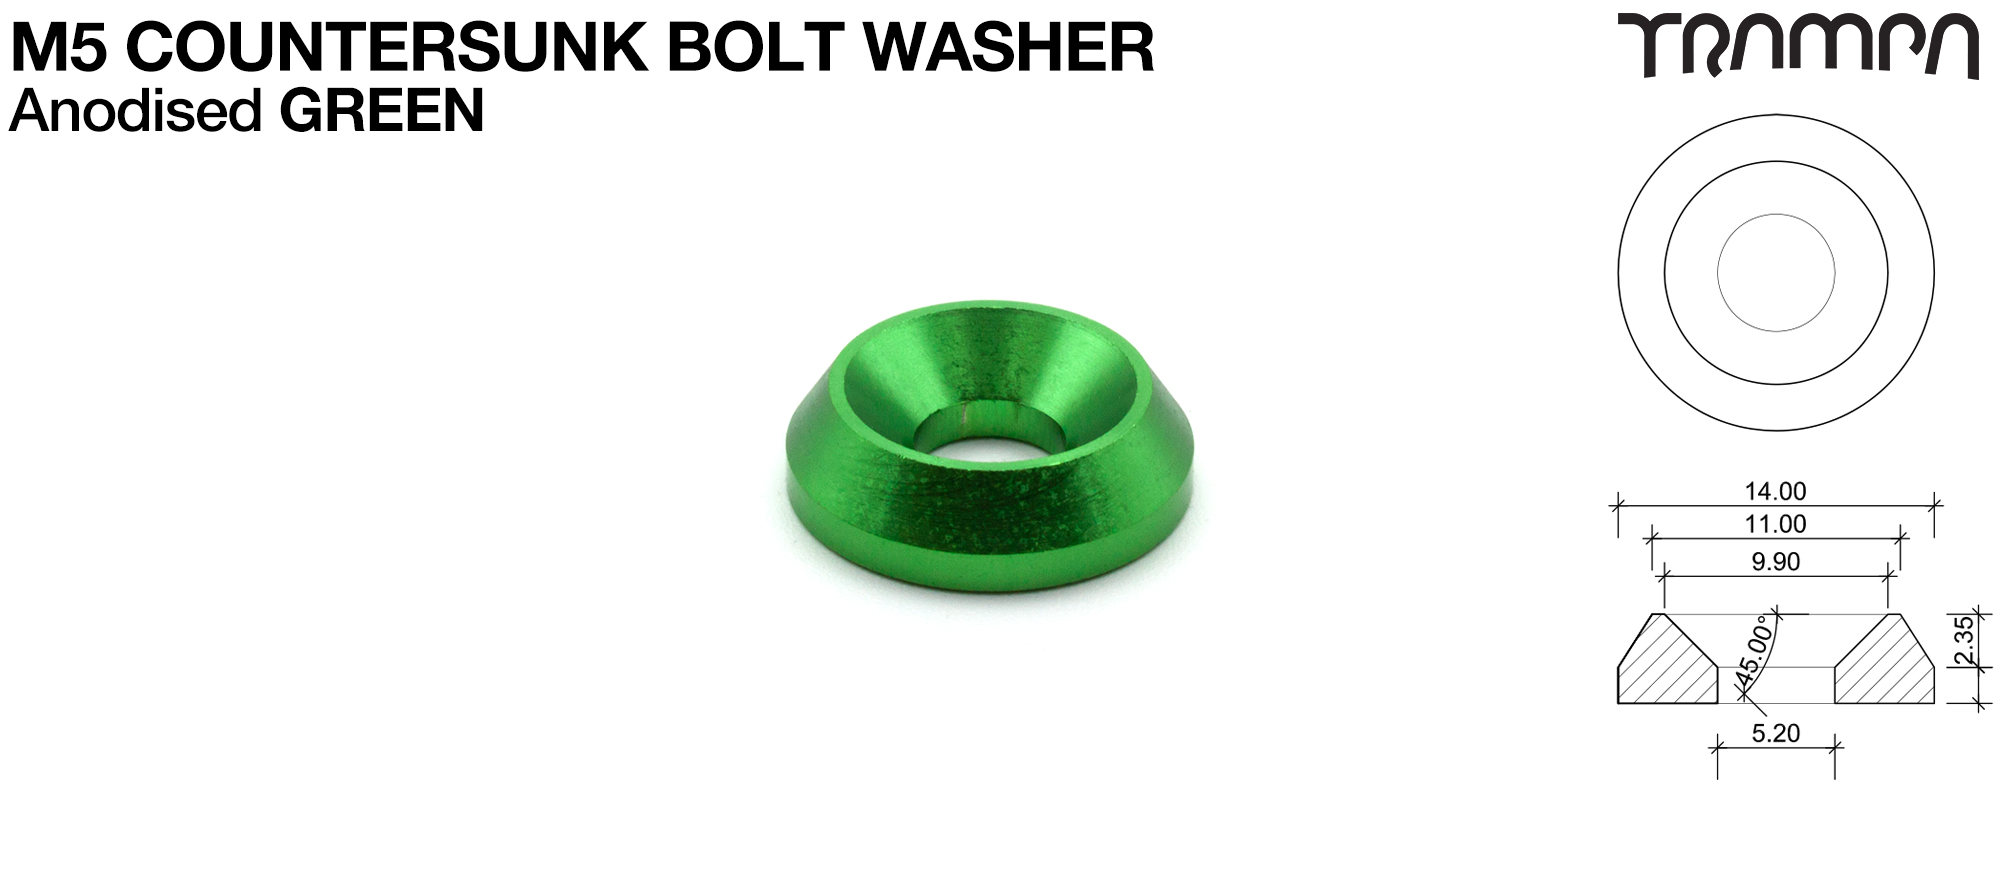 GREEN Anodised M5 Countersunk Washers